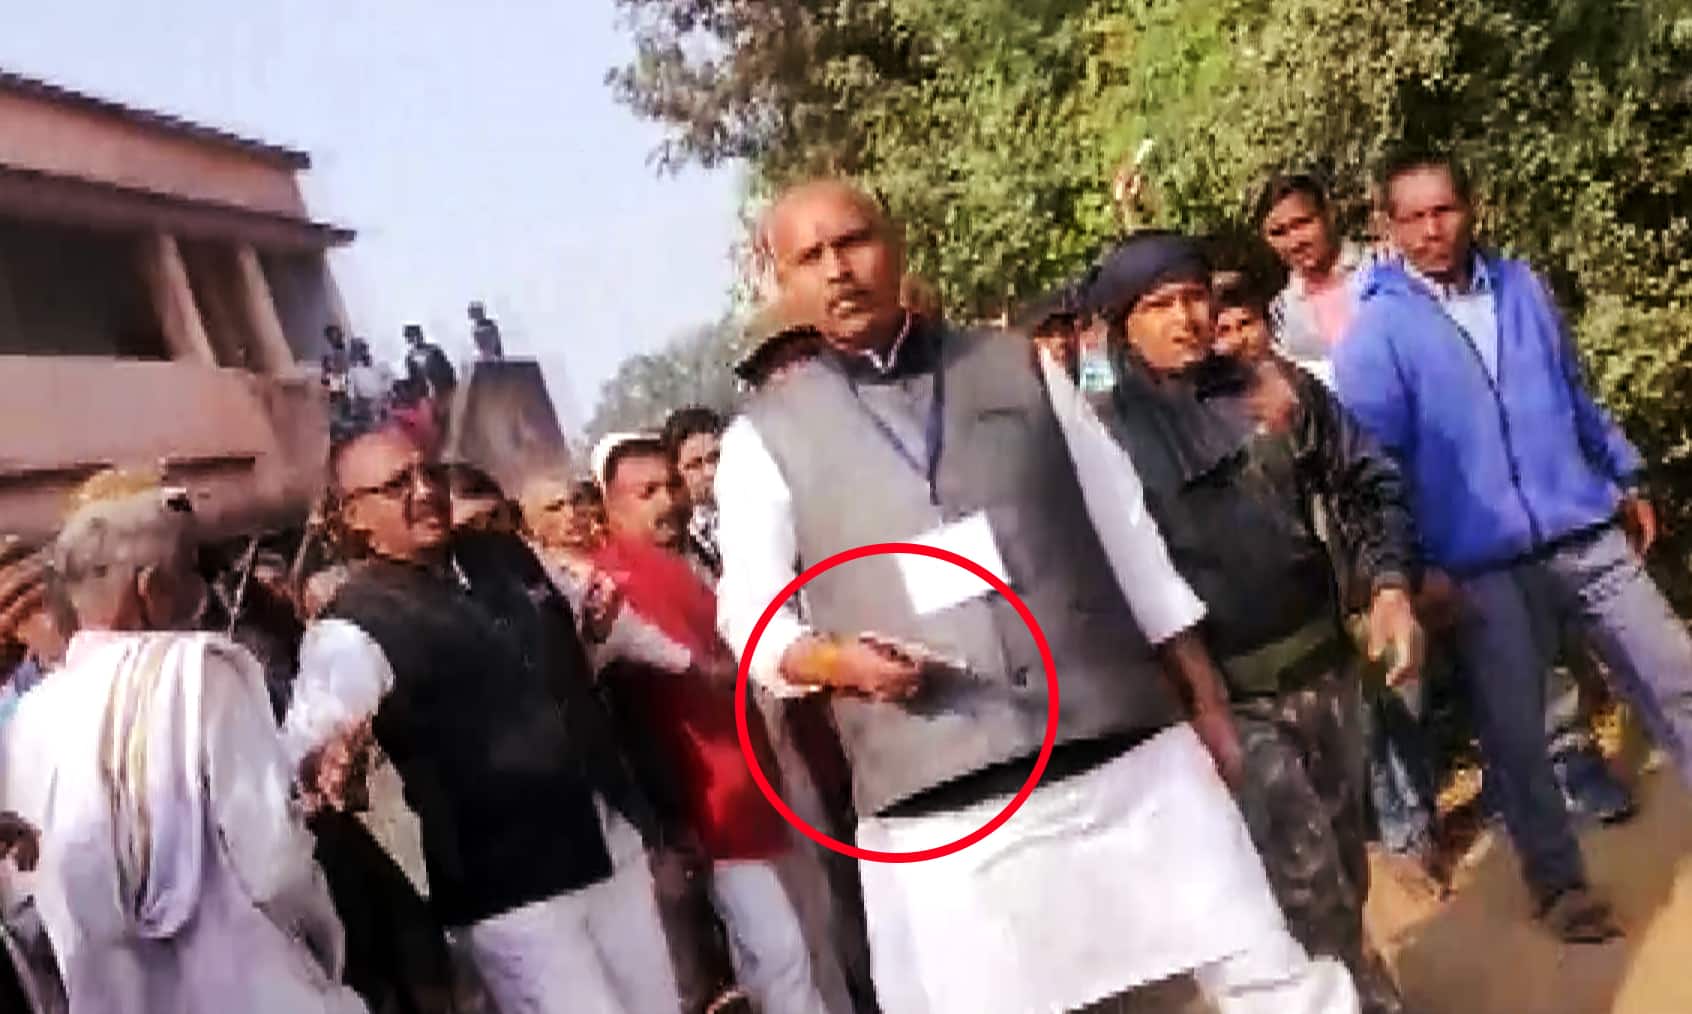 Jharkhand assembly election 2019: Congress candidate brandishes pistol at polling booth after clash with BJP workers